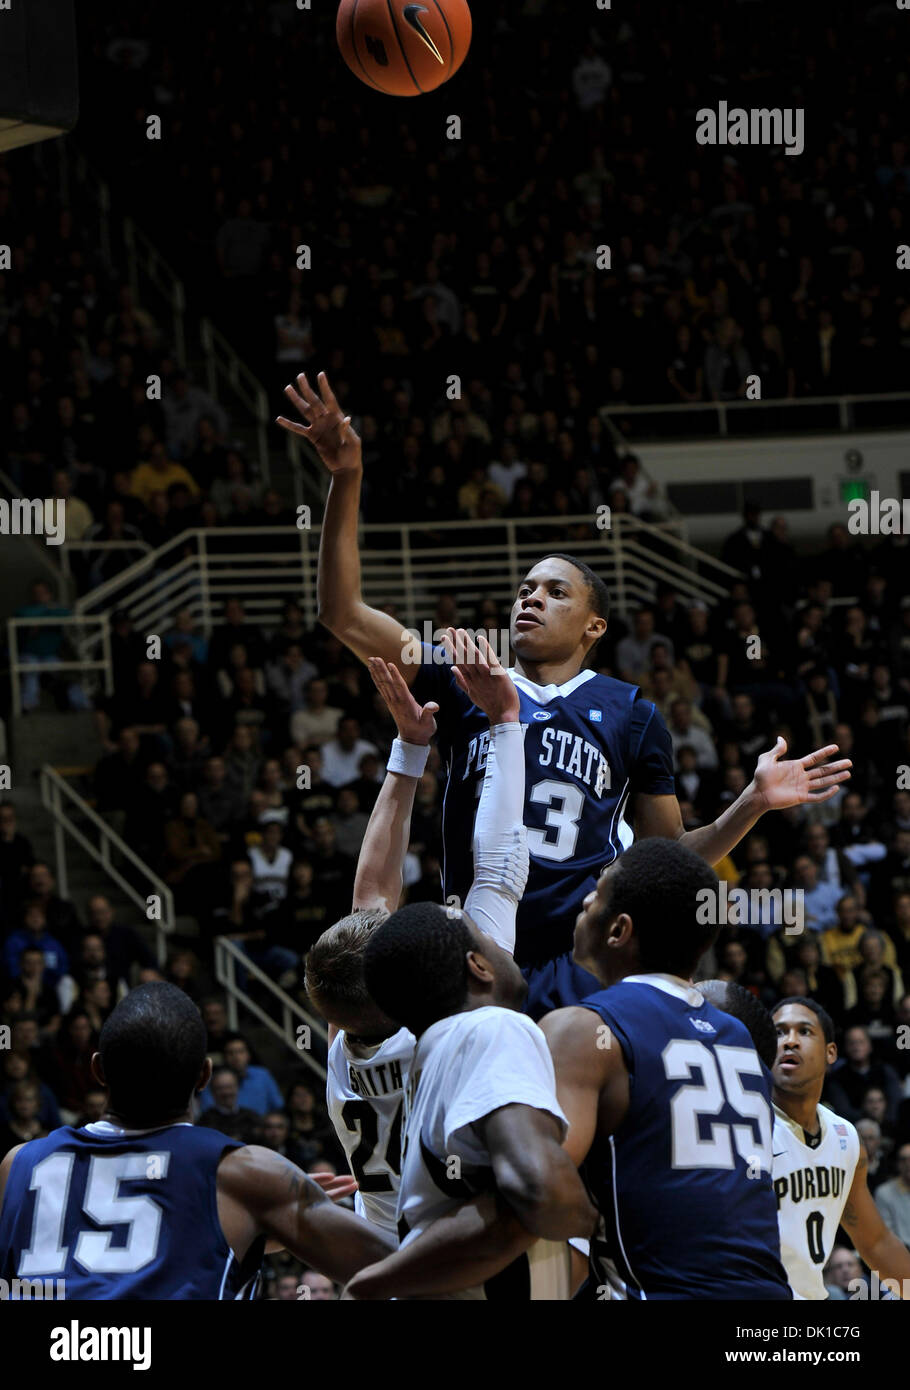 Jan. 20, 2011 - West Lafayette, Indiana, United States of America - Penn State's So G Tim Frazier (23) looks after his shot in traffic  in the game between Penn State and Purdue at Mackey Arena in West Lafayette. Purdue won the game 63-62. (Credit Image: © Sandra Dukes/Southcreek Global/ZUMAPRESS.com) Stock Photo